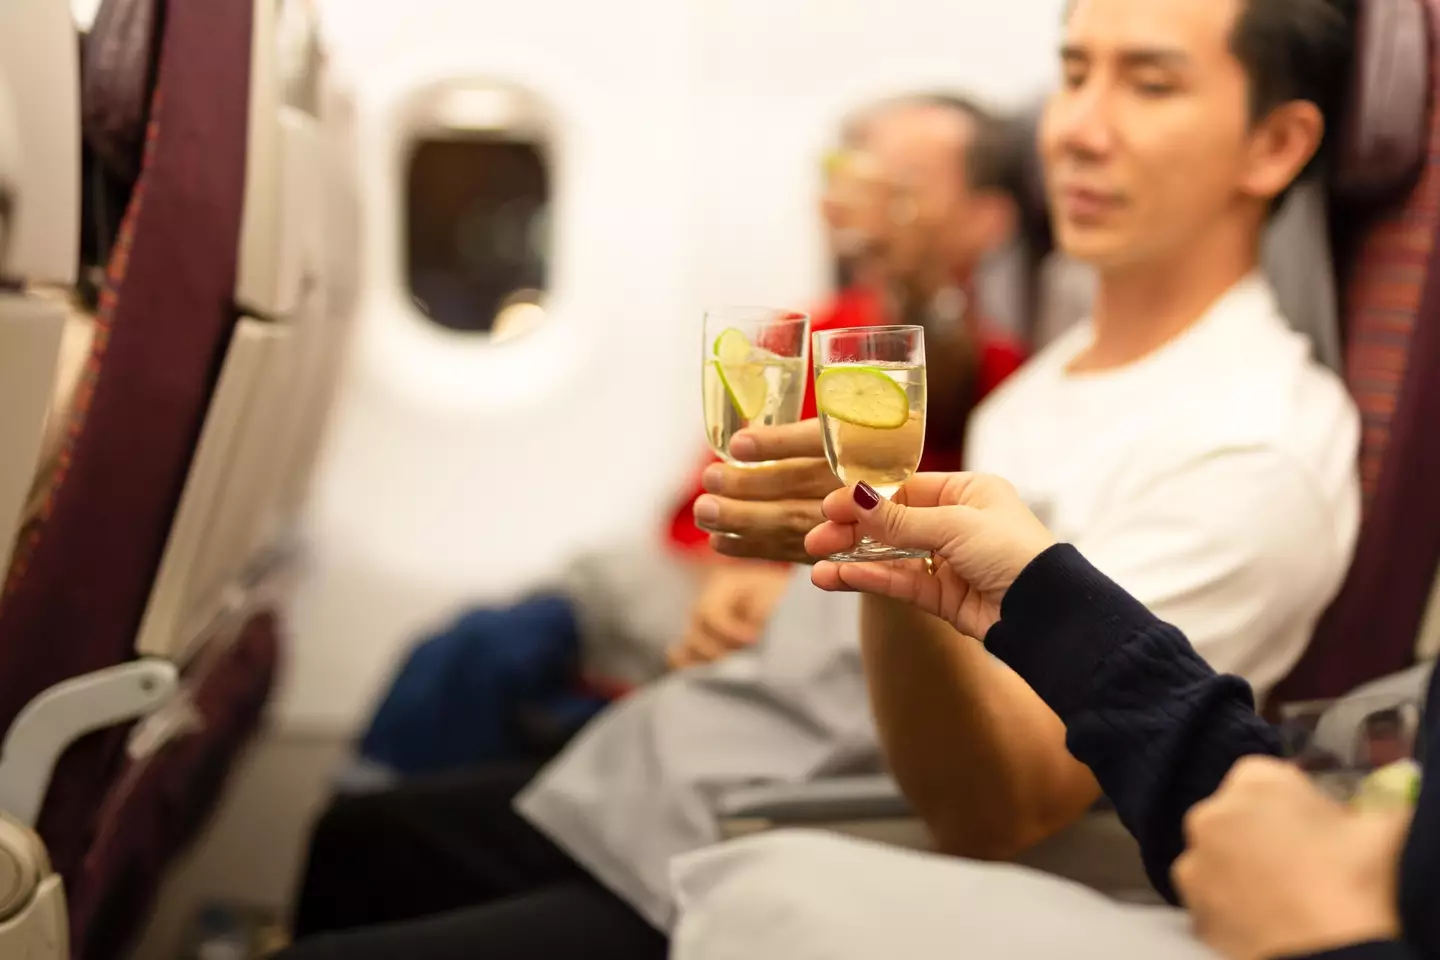 Experts say you should avoid drinking on planes.